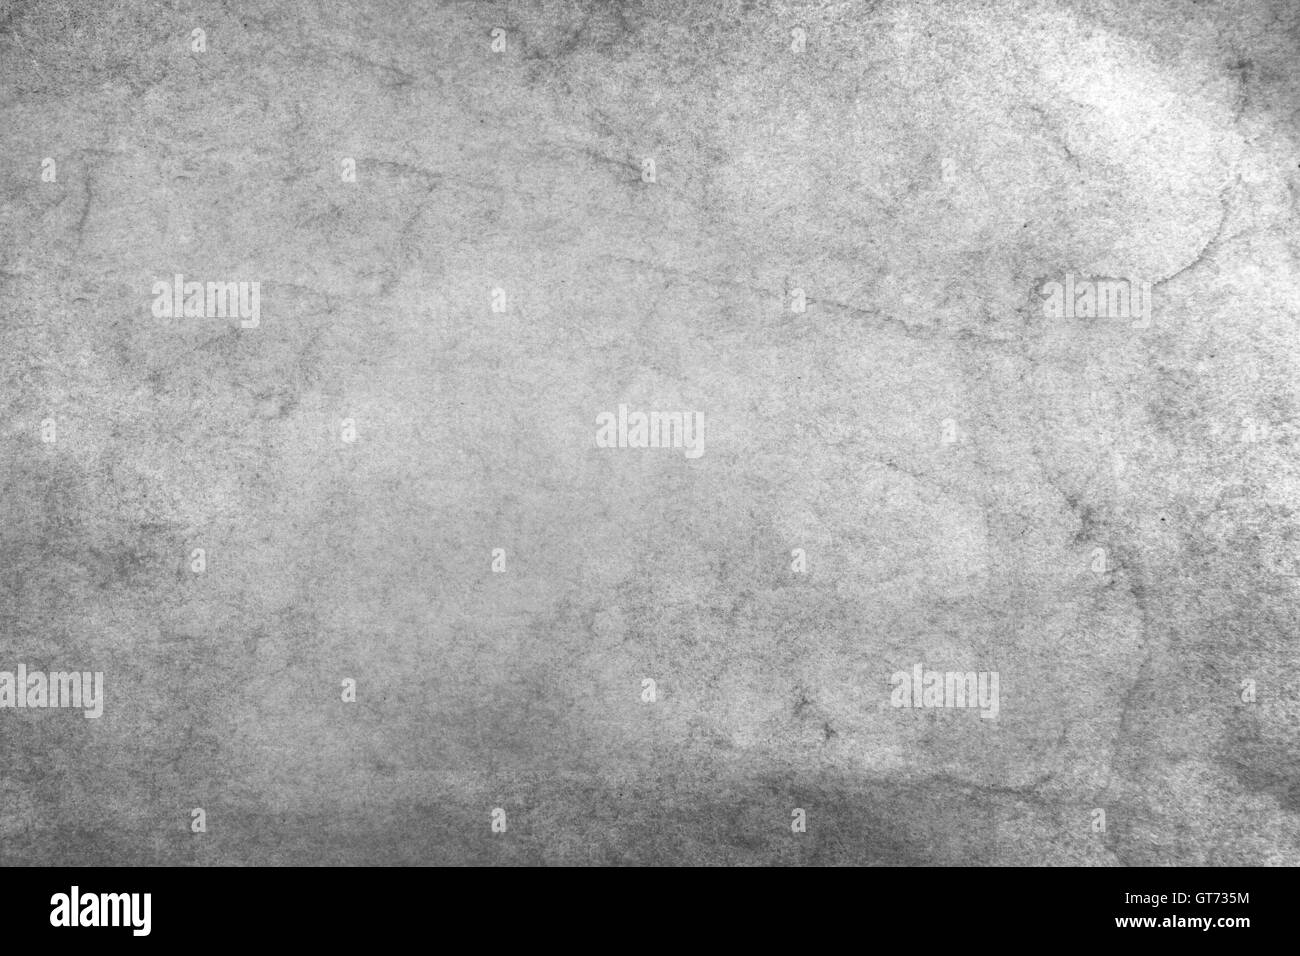 Closeup of textured gray background Stock Photo